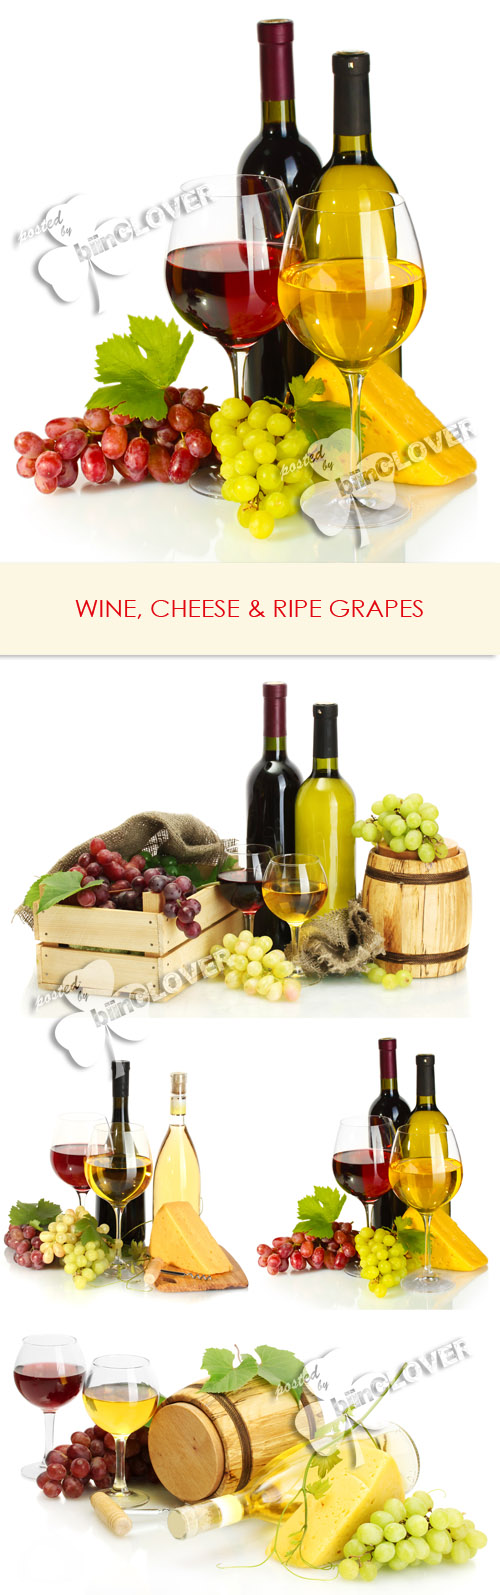 Wine, cheese and ripe grapes 0212